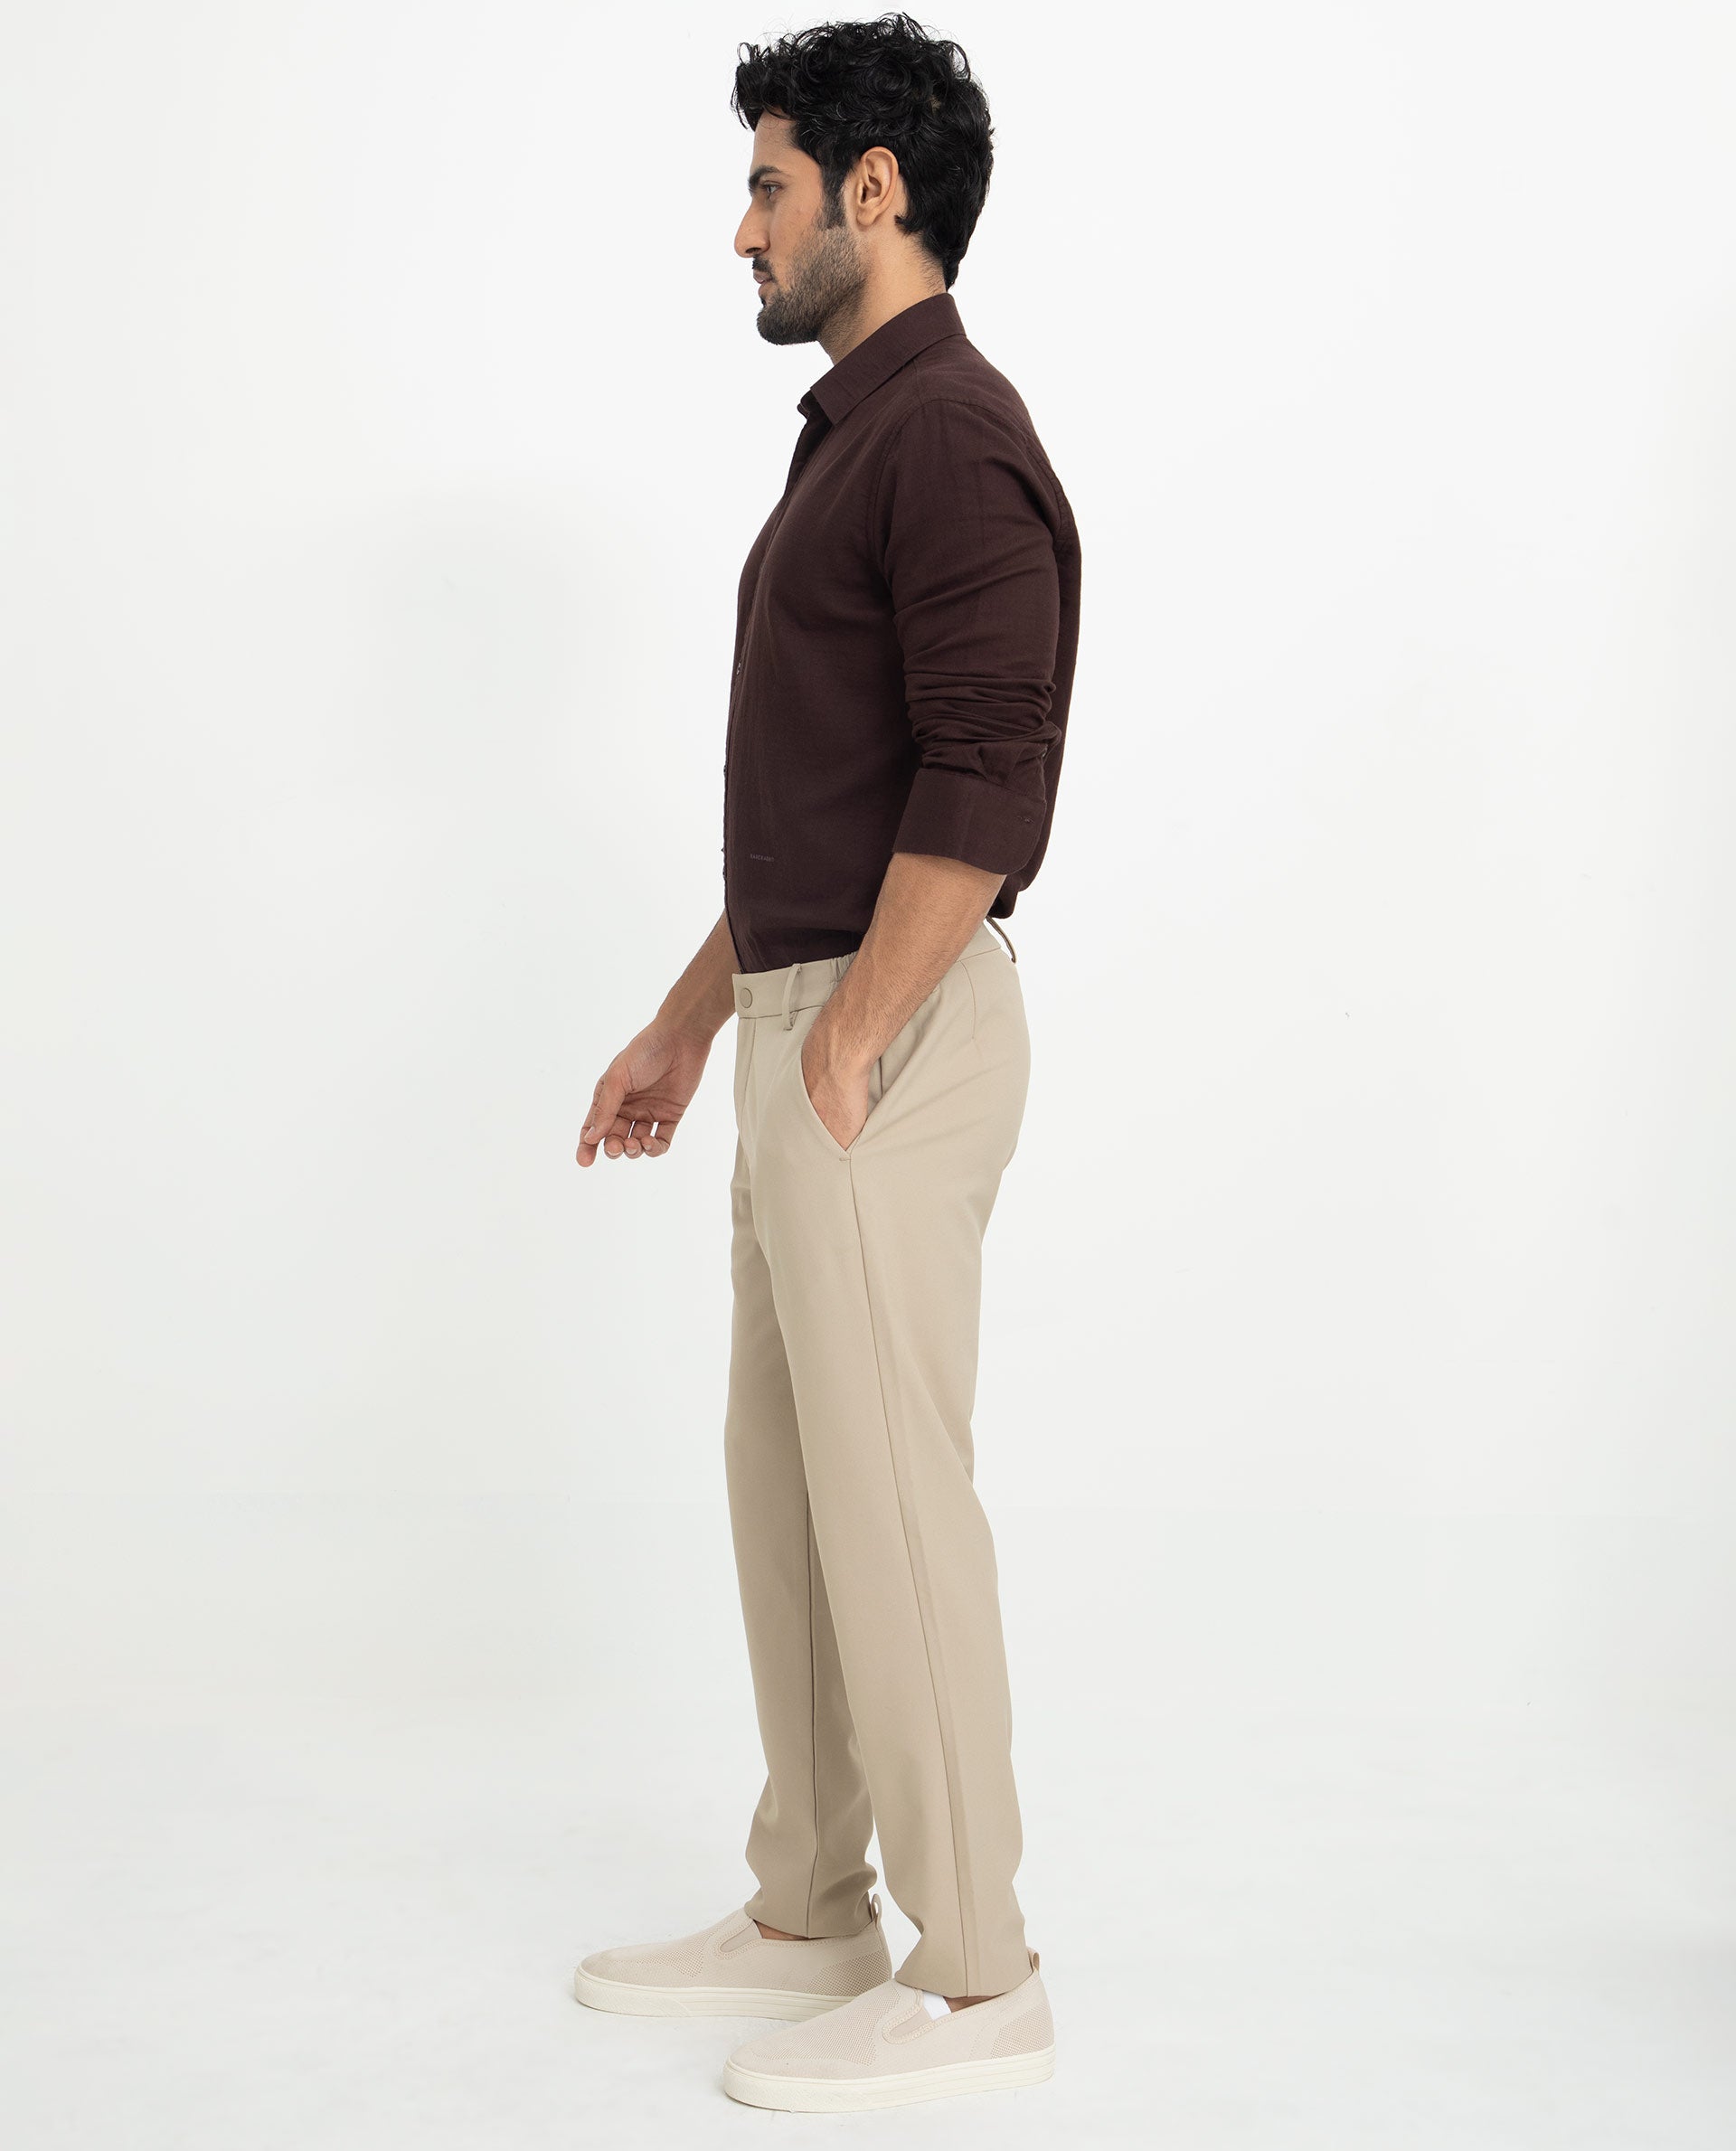 Brown Pants Outfits: 18 Examples & The Colours That Go Best